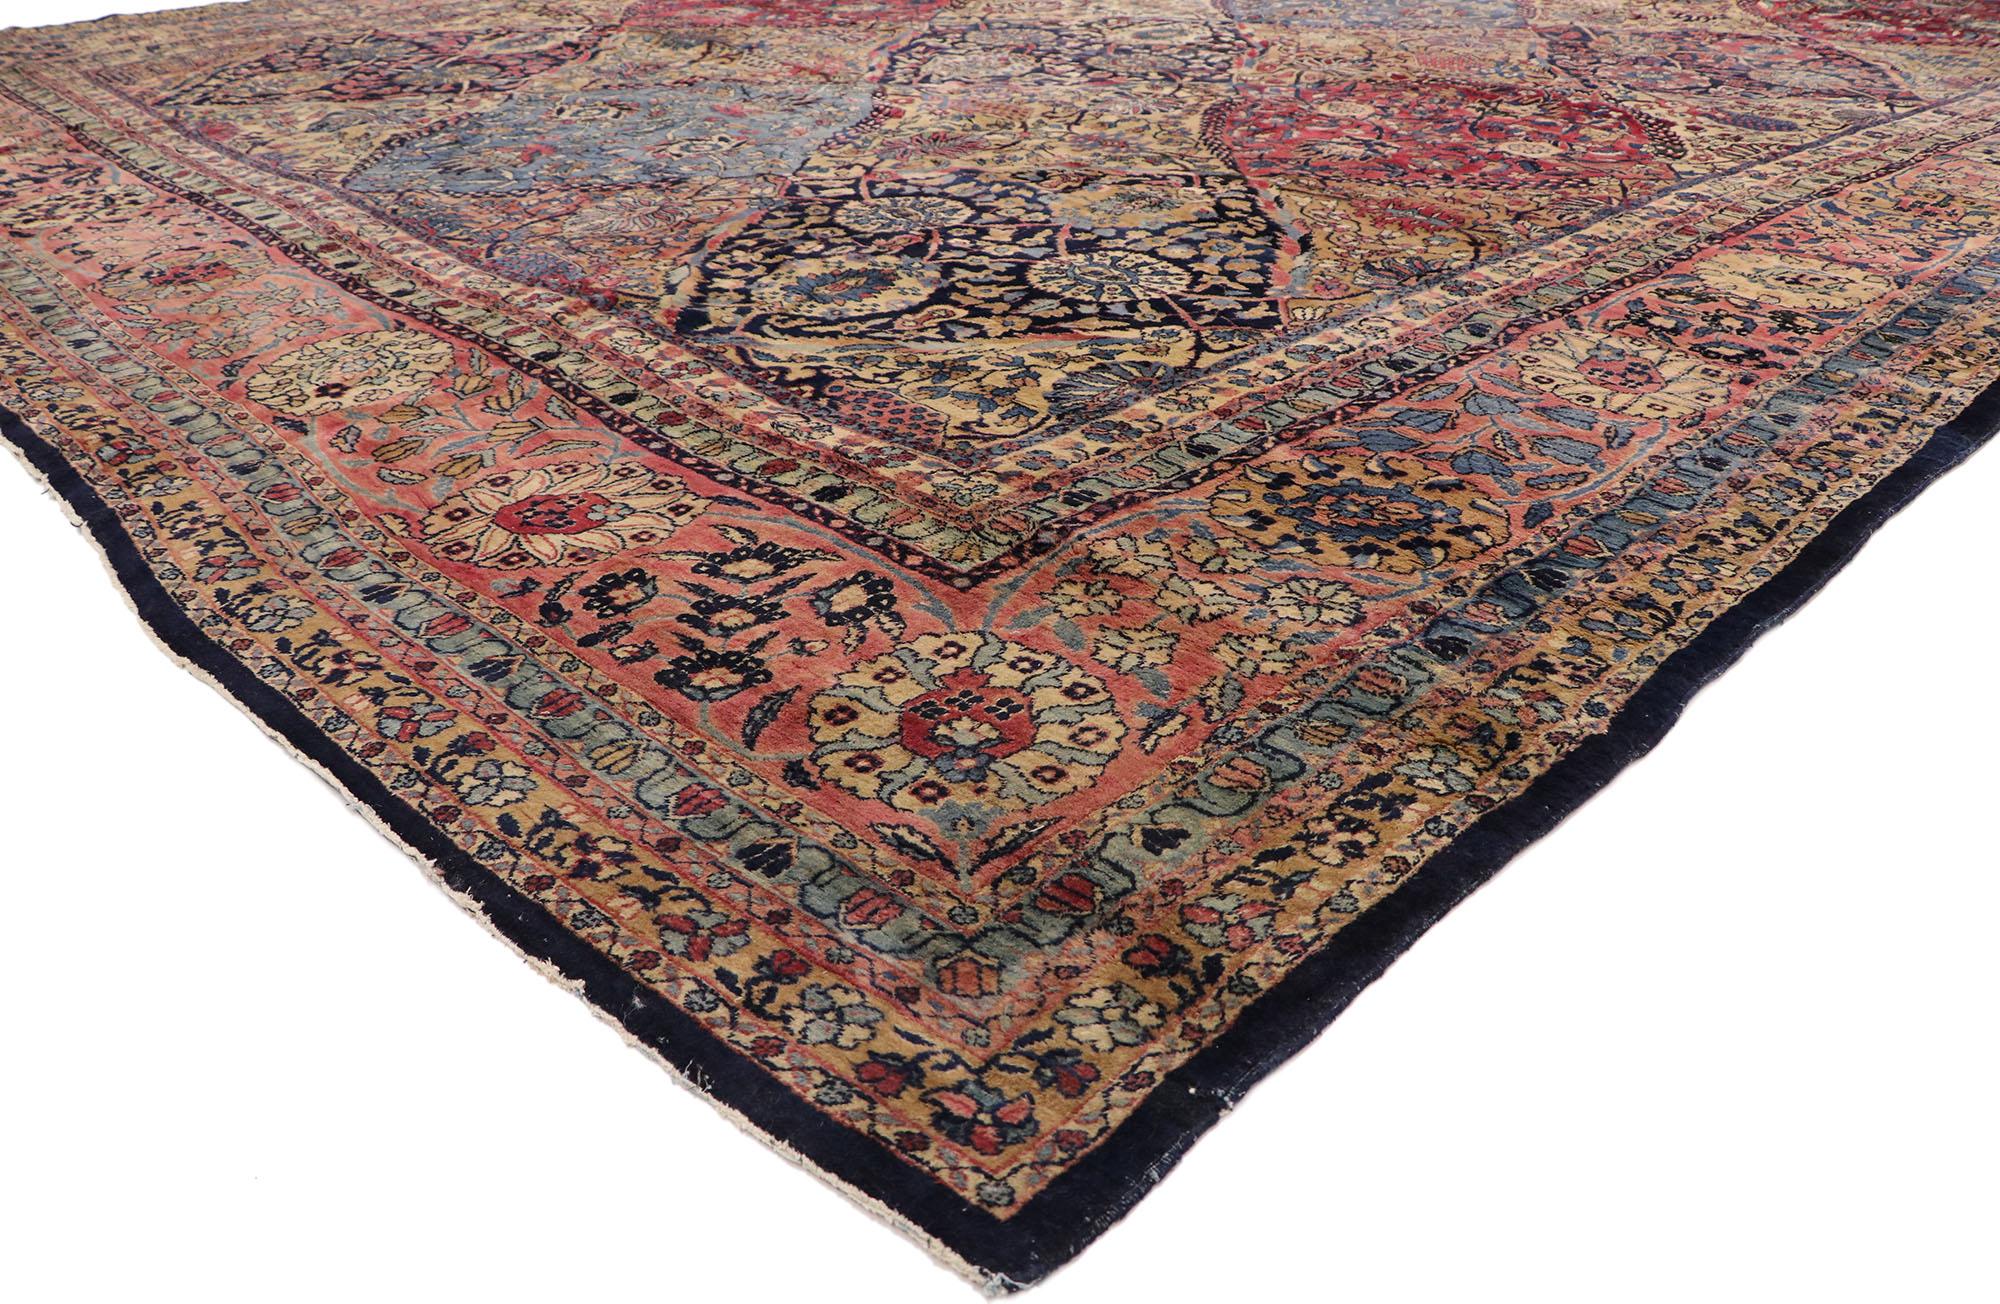 76837 Oversized Antique Persian Kerman Rug,11'03 x 23'06. Kerman rugs originate from the city of Kerman, which is located in south-central Iran. Kerman is renowned as one of the major weaving centers in Iran, historically producing some of the